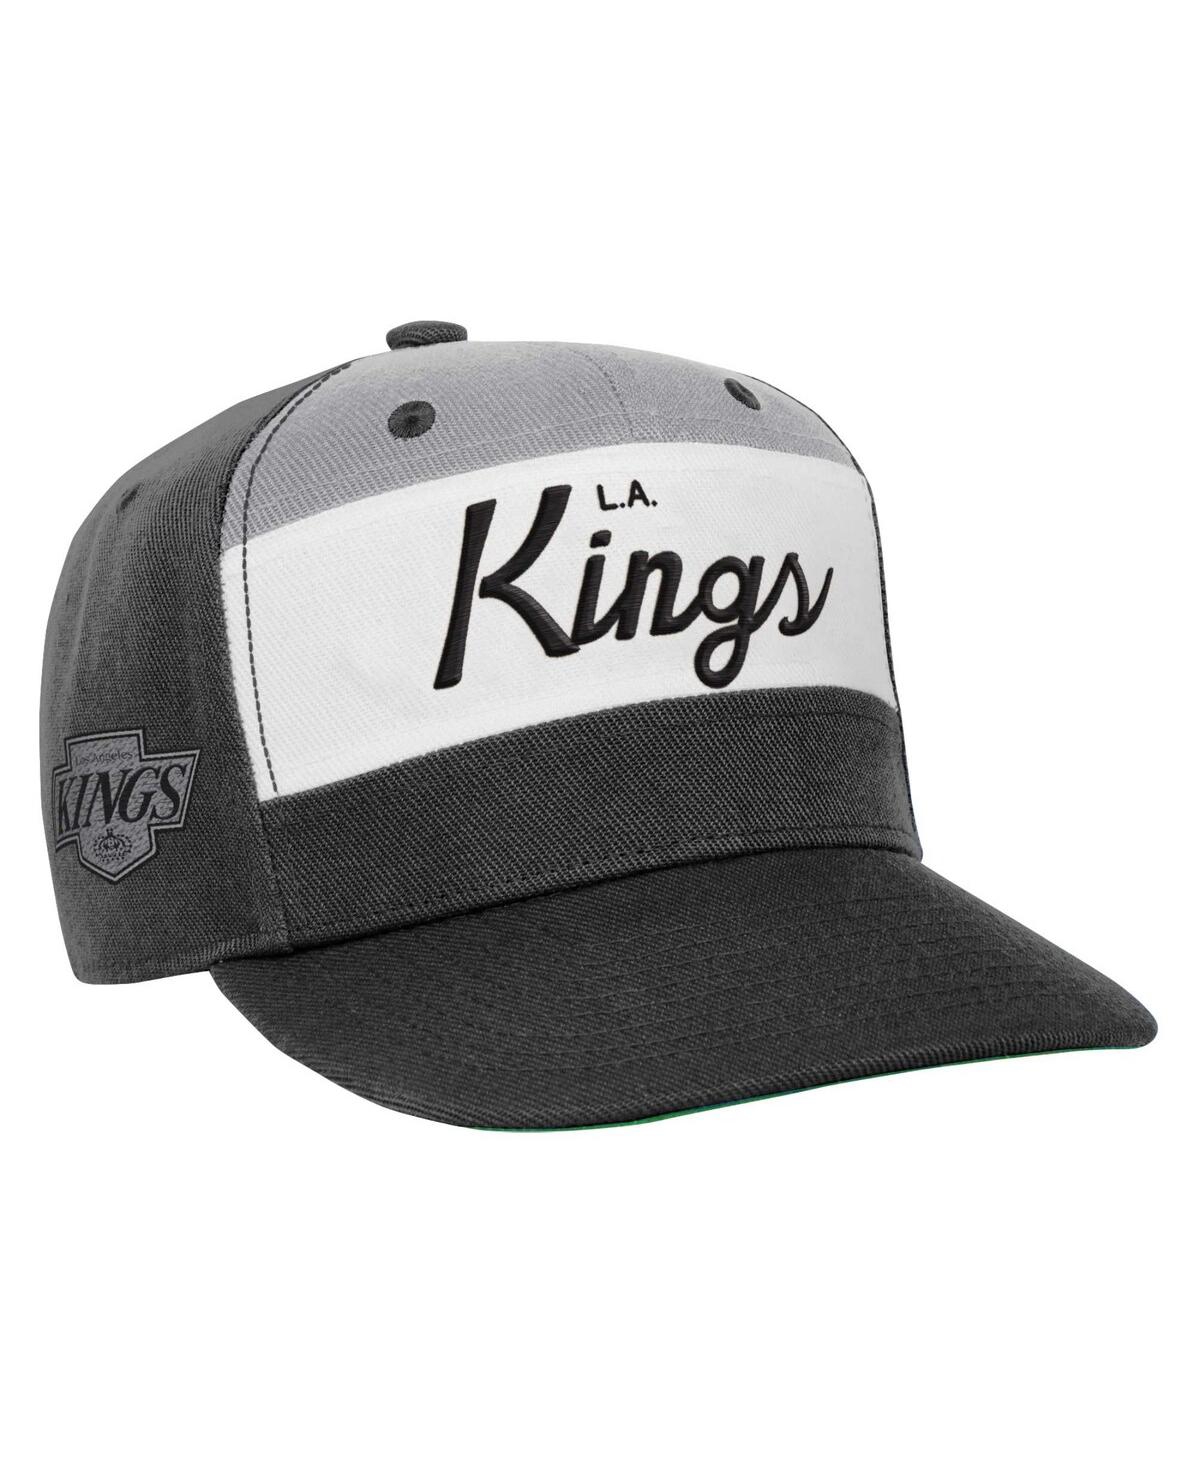 Mitchell & Ness Kids' Youth Boys And Girls  Black Los Angeles Kings Retro Script Colorblocked Adjustable Ha